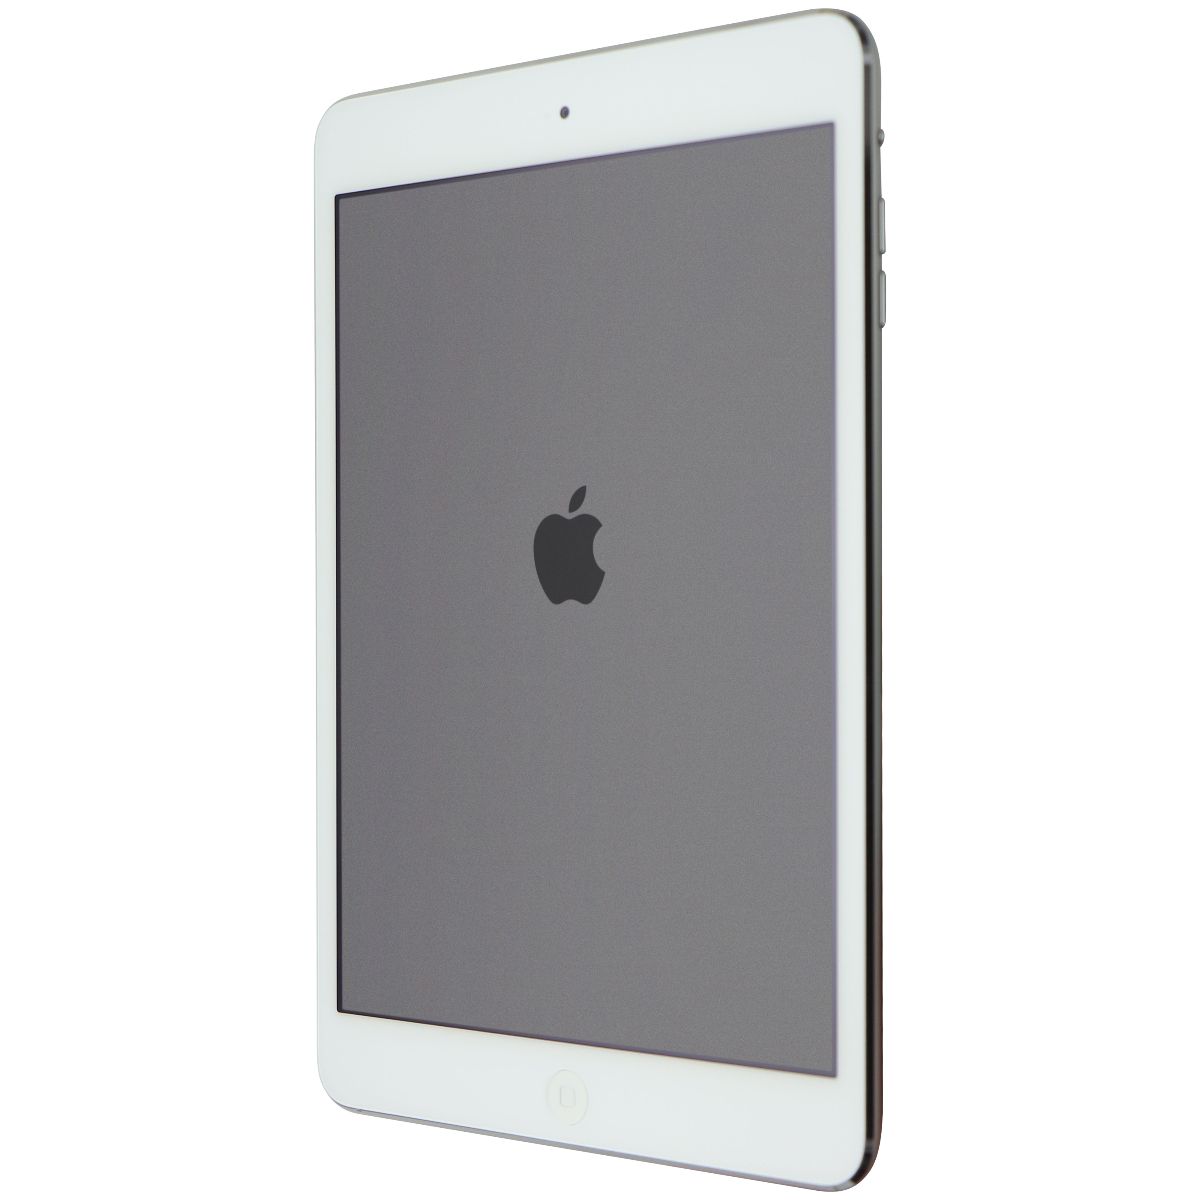 Apple iPad mini 2 (Wi-Fi Only) A1489 - 16GB/Silver (ME279LL/A) iPads, Tablets & eBook Readers Apple    - Simple Cell Bulk Wholesale Pricing - USA Seller